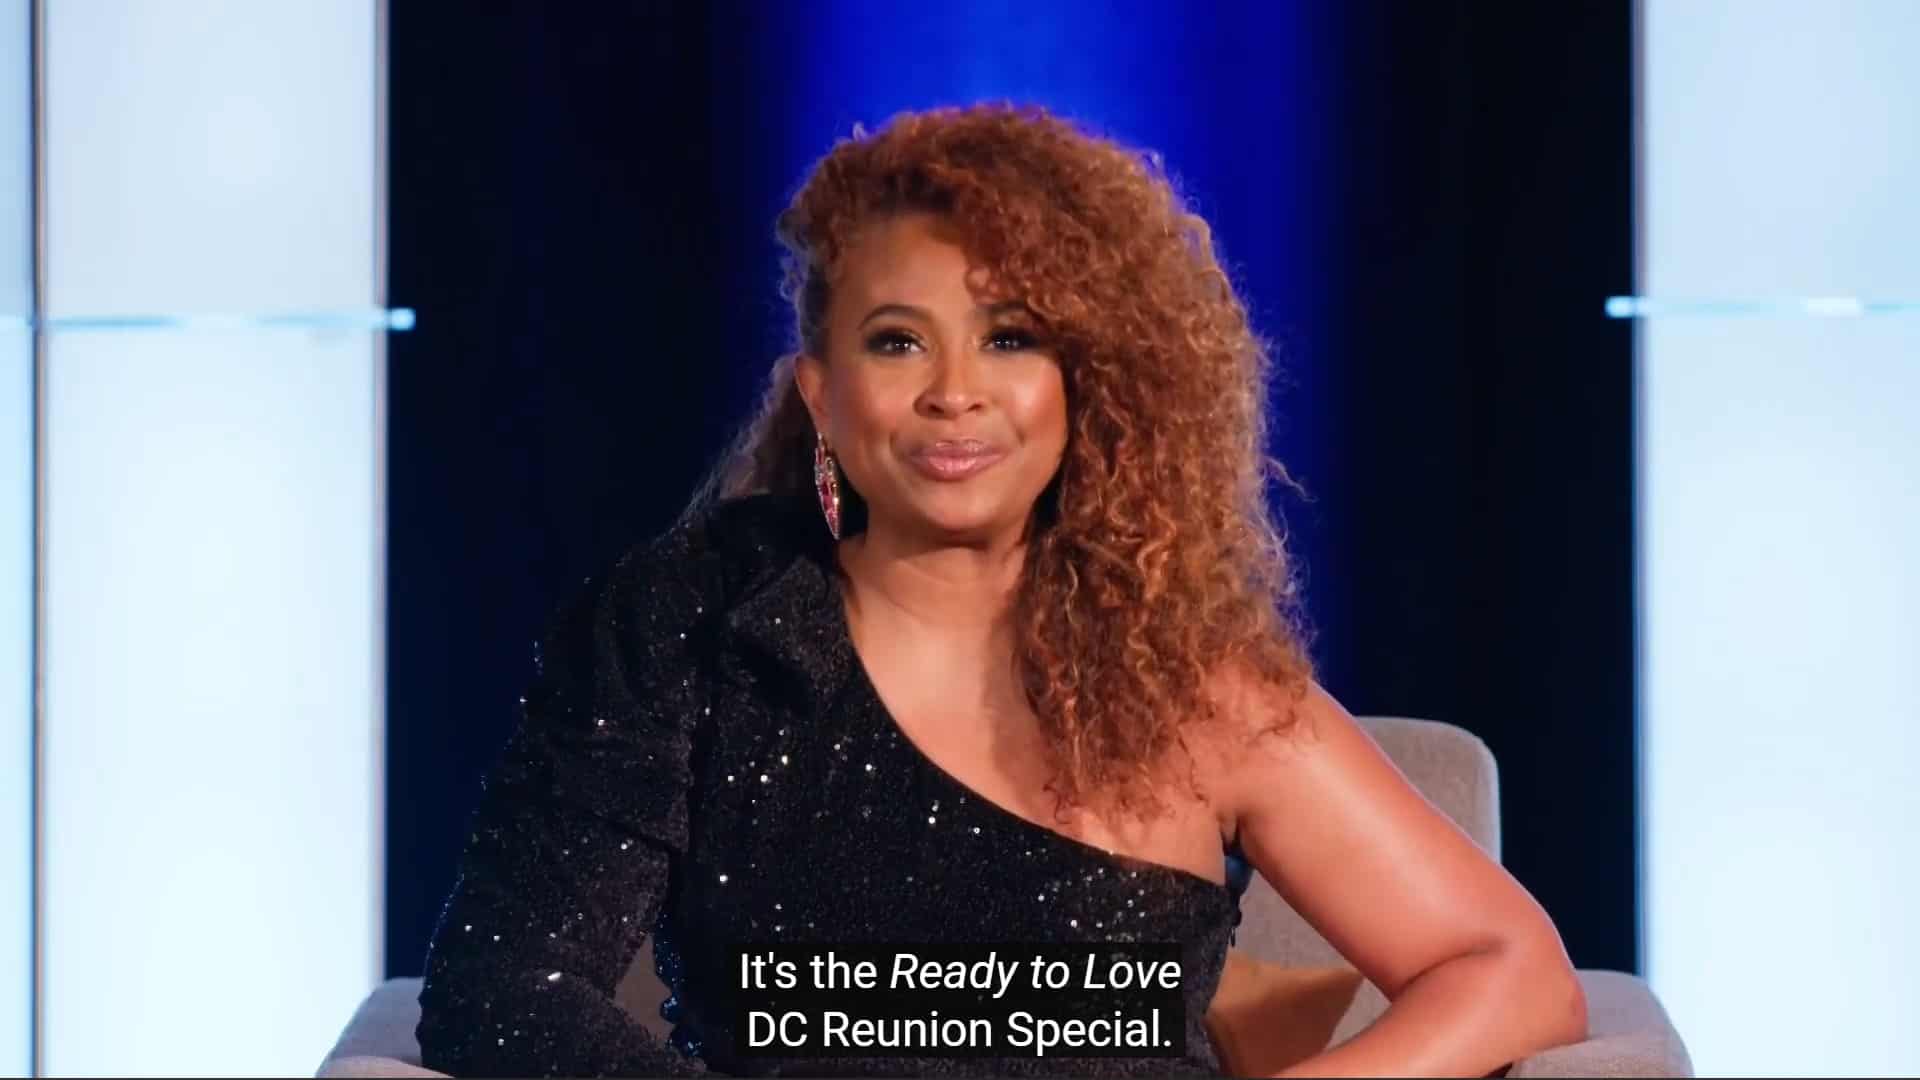 Tanika Ray welcoming viewers to the Ready To Love DC Reunion special